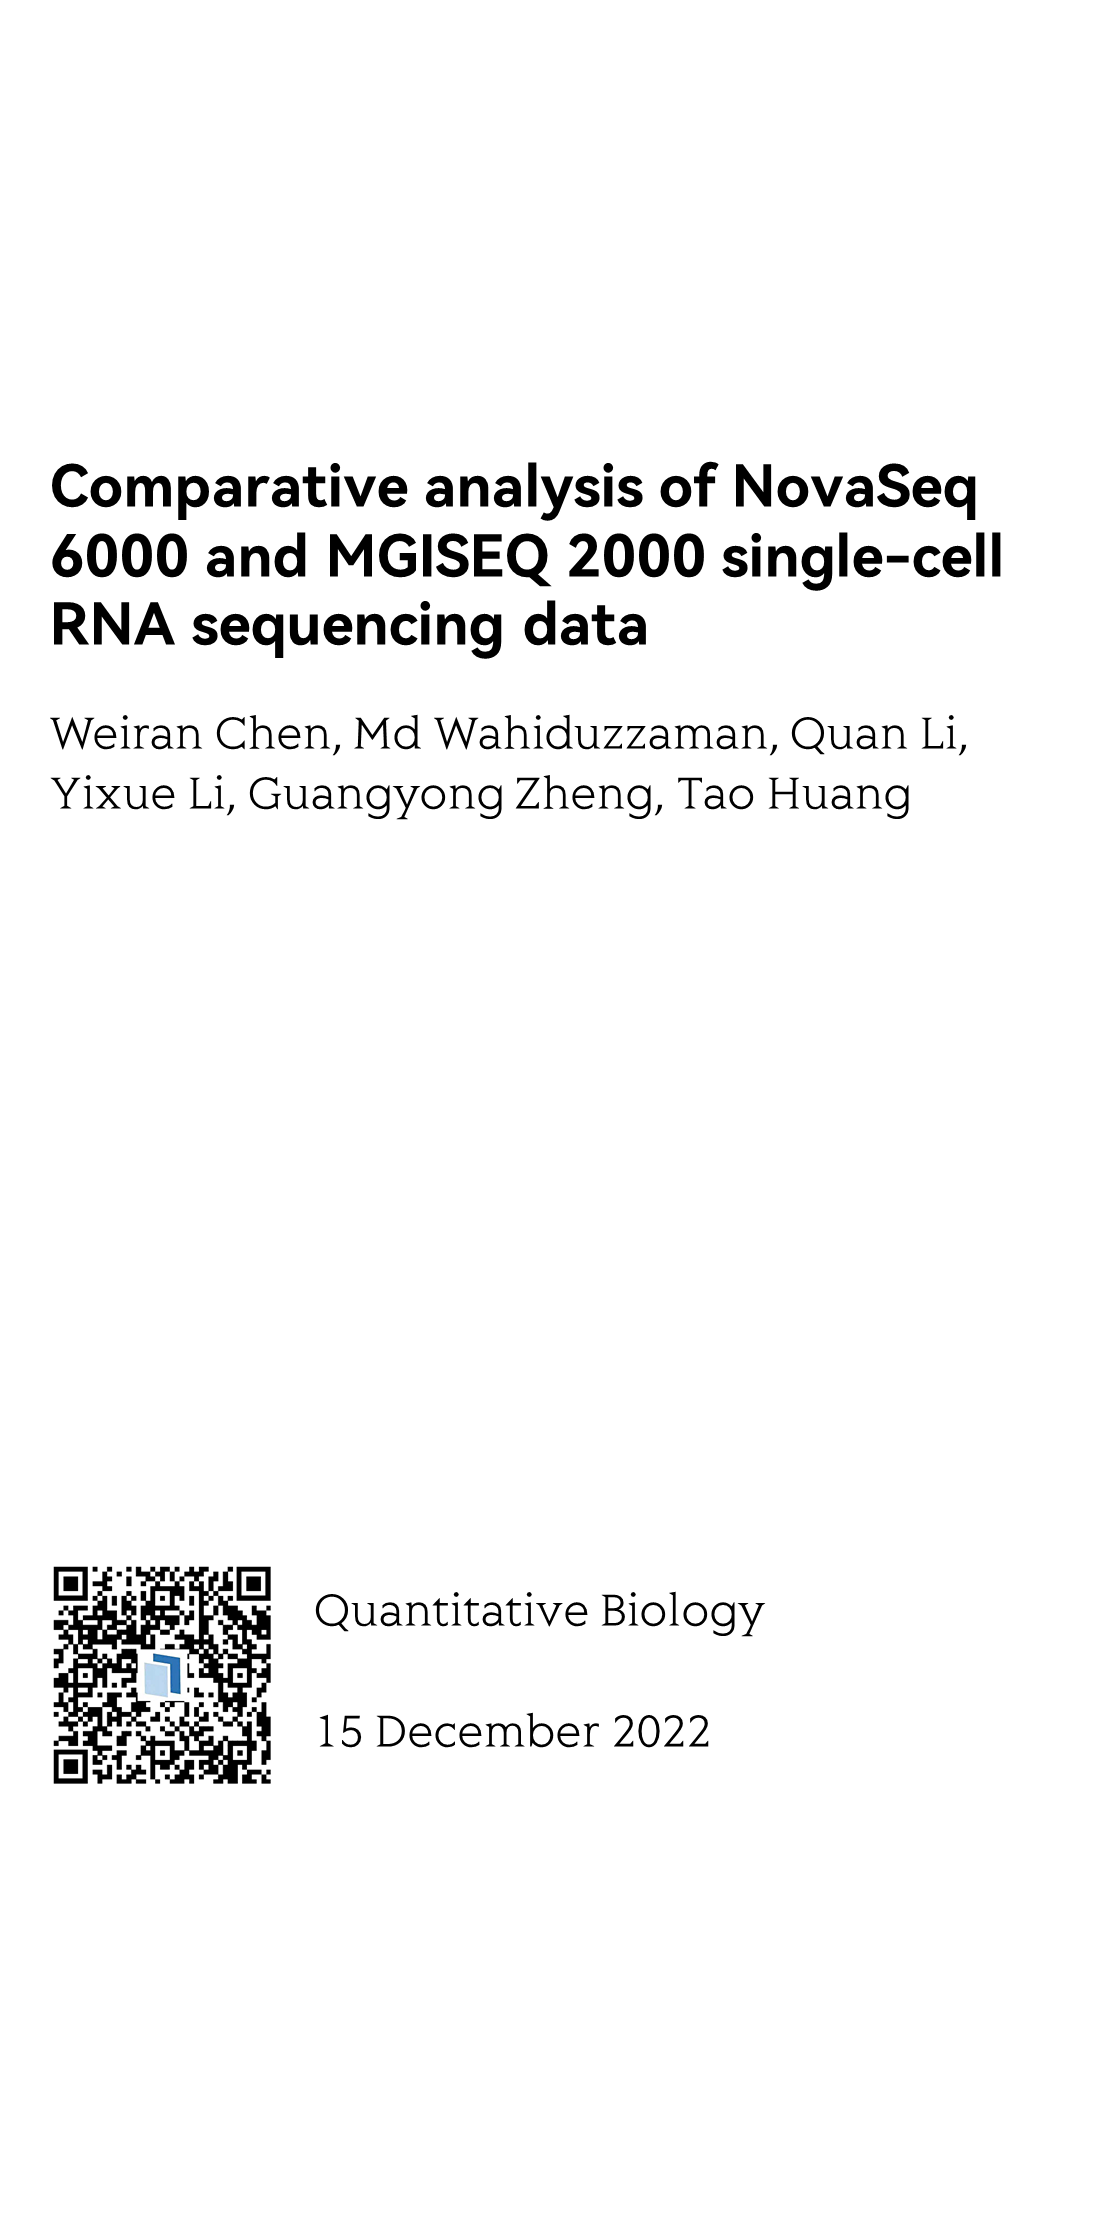 Comparative analysis of NovaSeq 6000 and MGISEQ 2000 single-cell RNA sequencing data_1